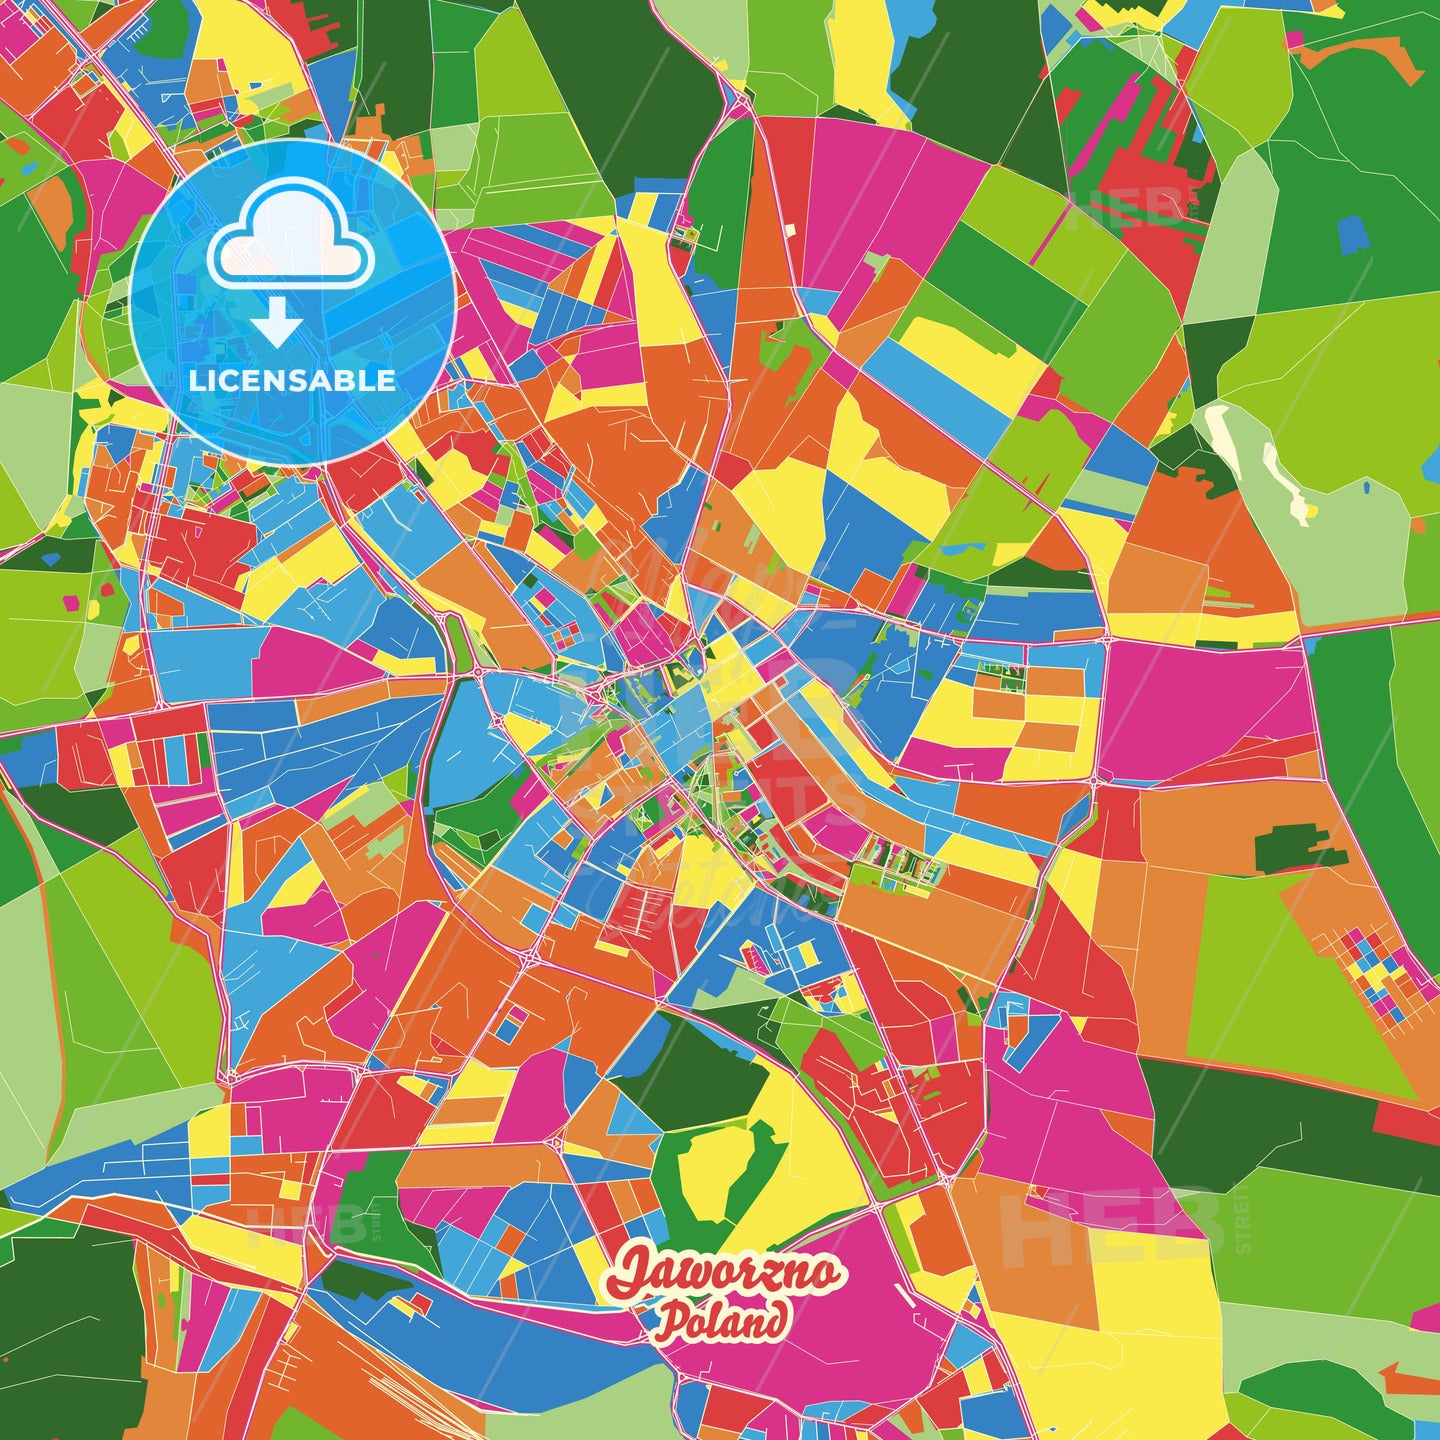 Jaworzno, Poland Crazy Colorful Street Map Poster Template - HEBSTREITS Sketches